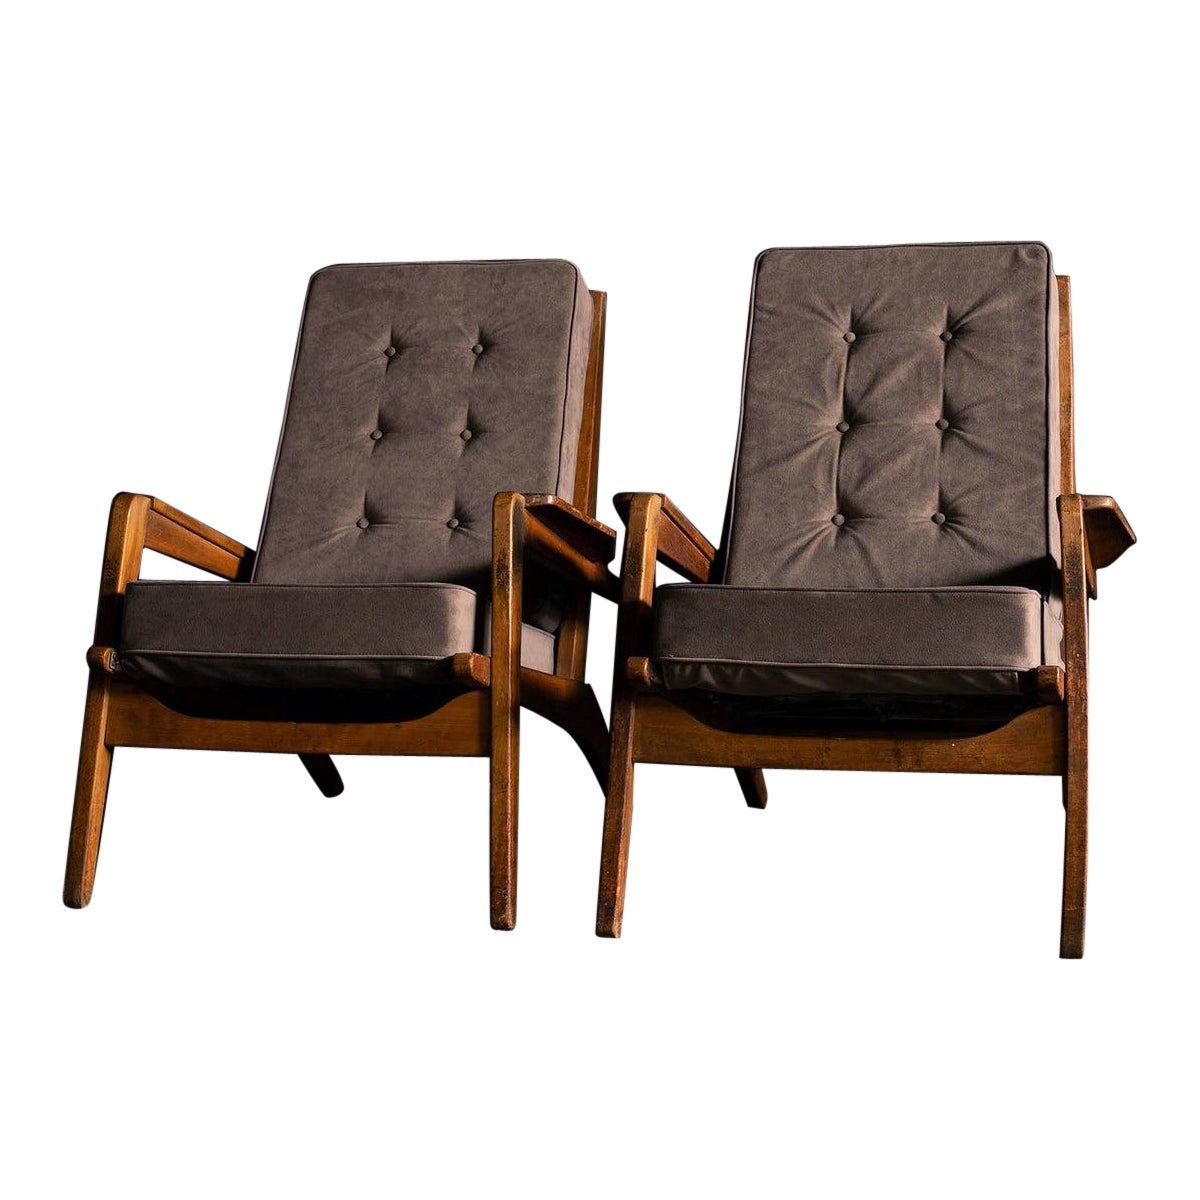 Pierre Guariche, Pair of FS 105 Armchairs, 1950s, France